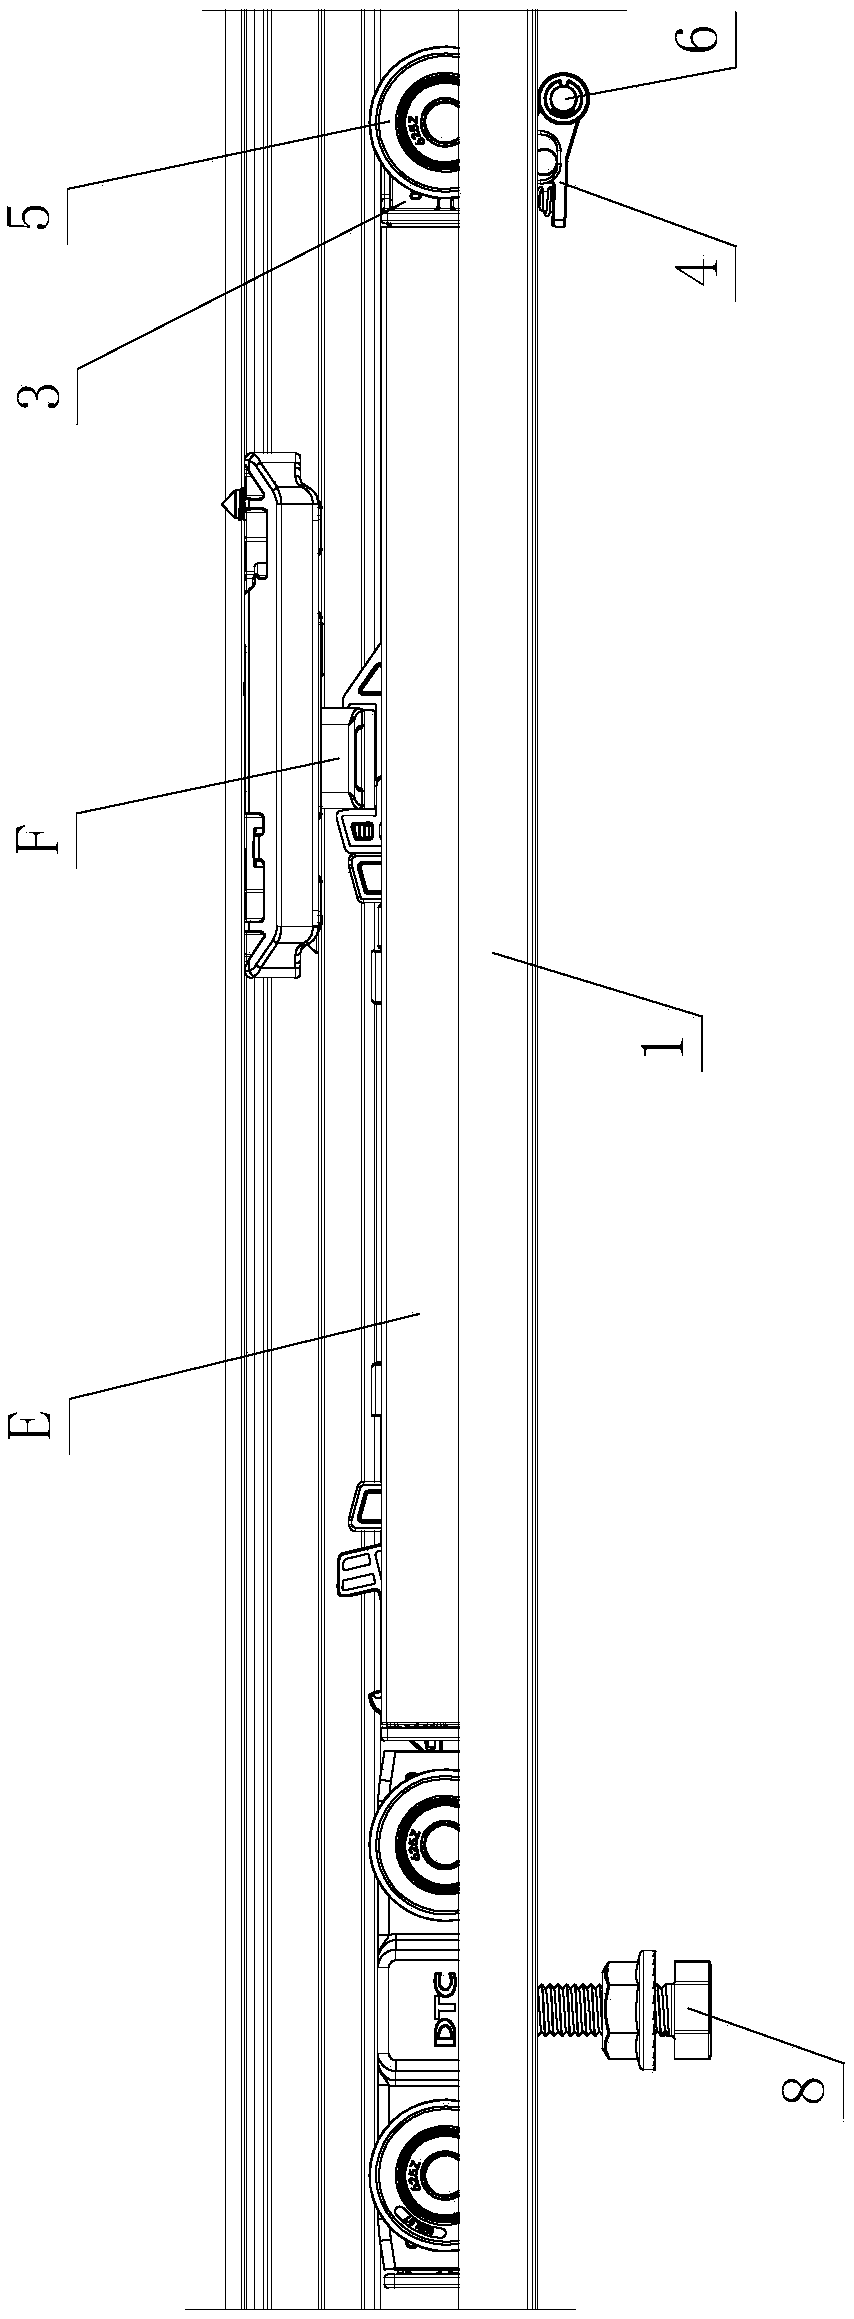 Opening-closing assisting structure of sliding door